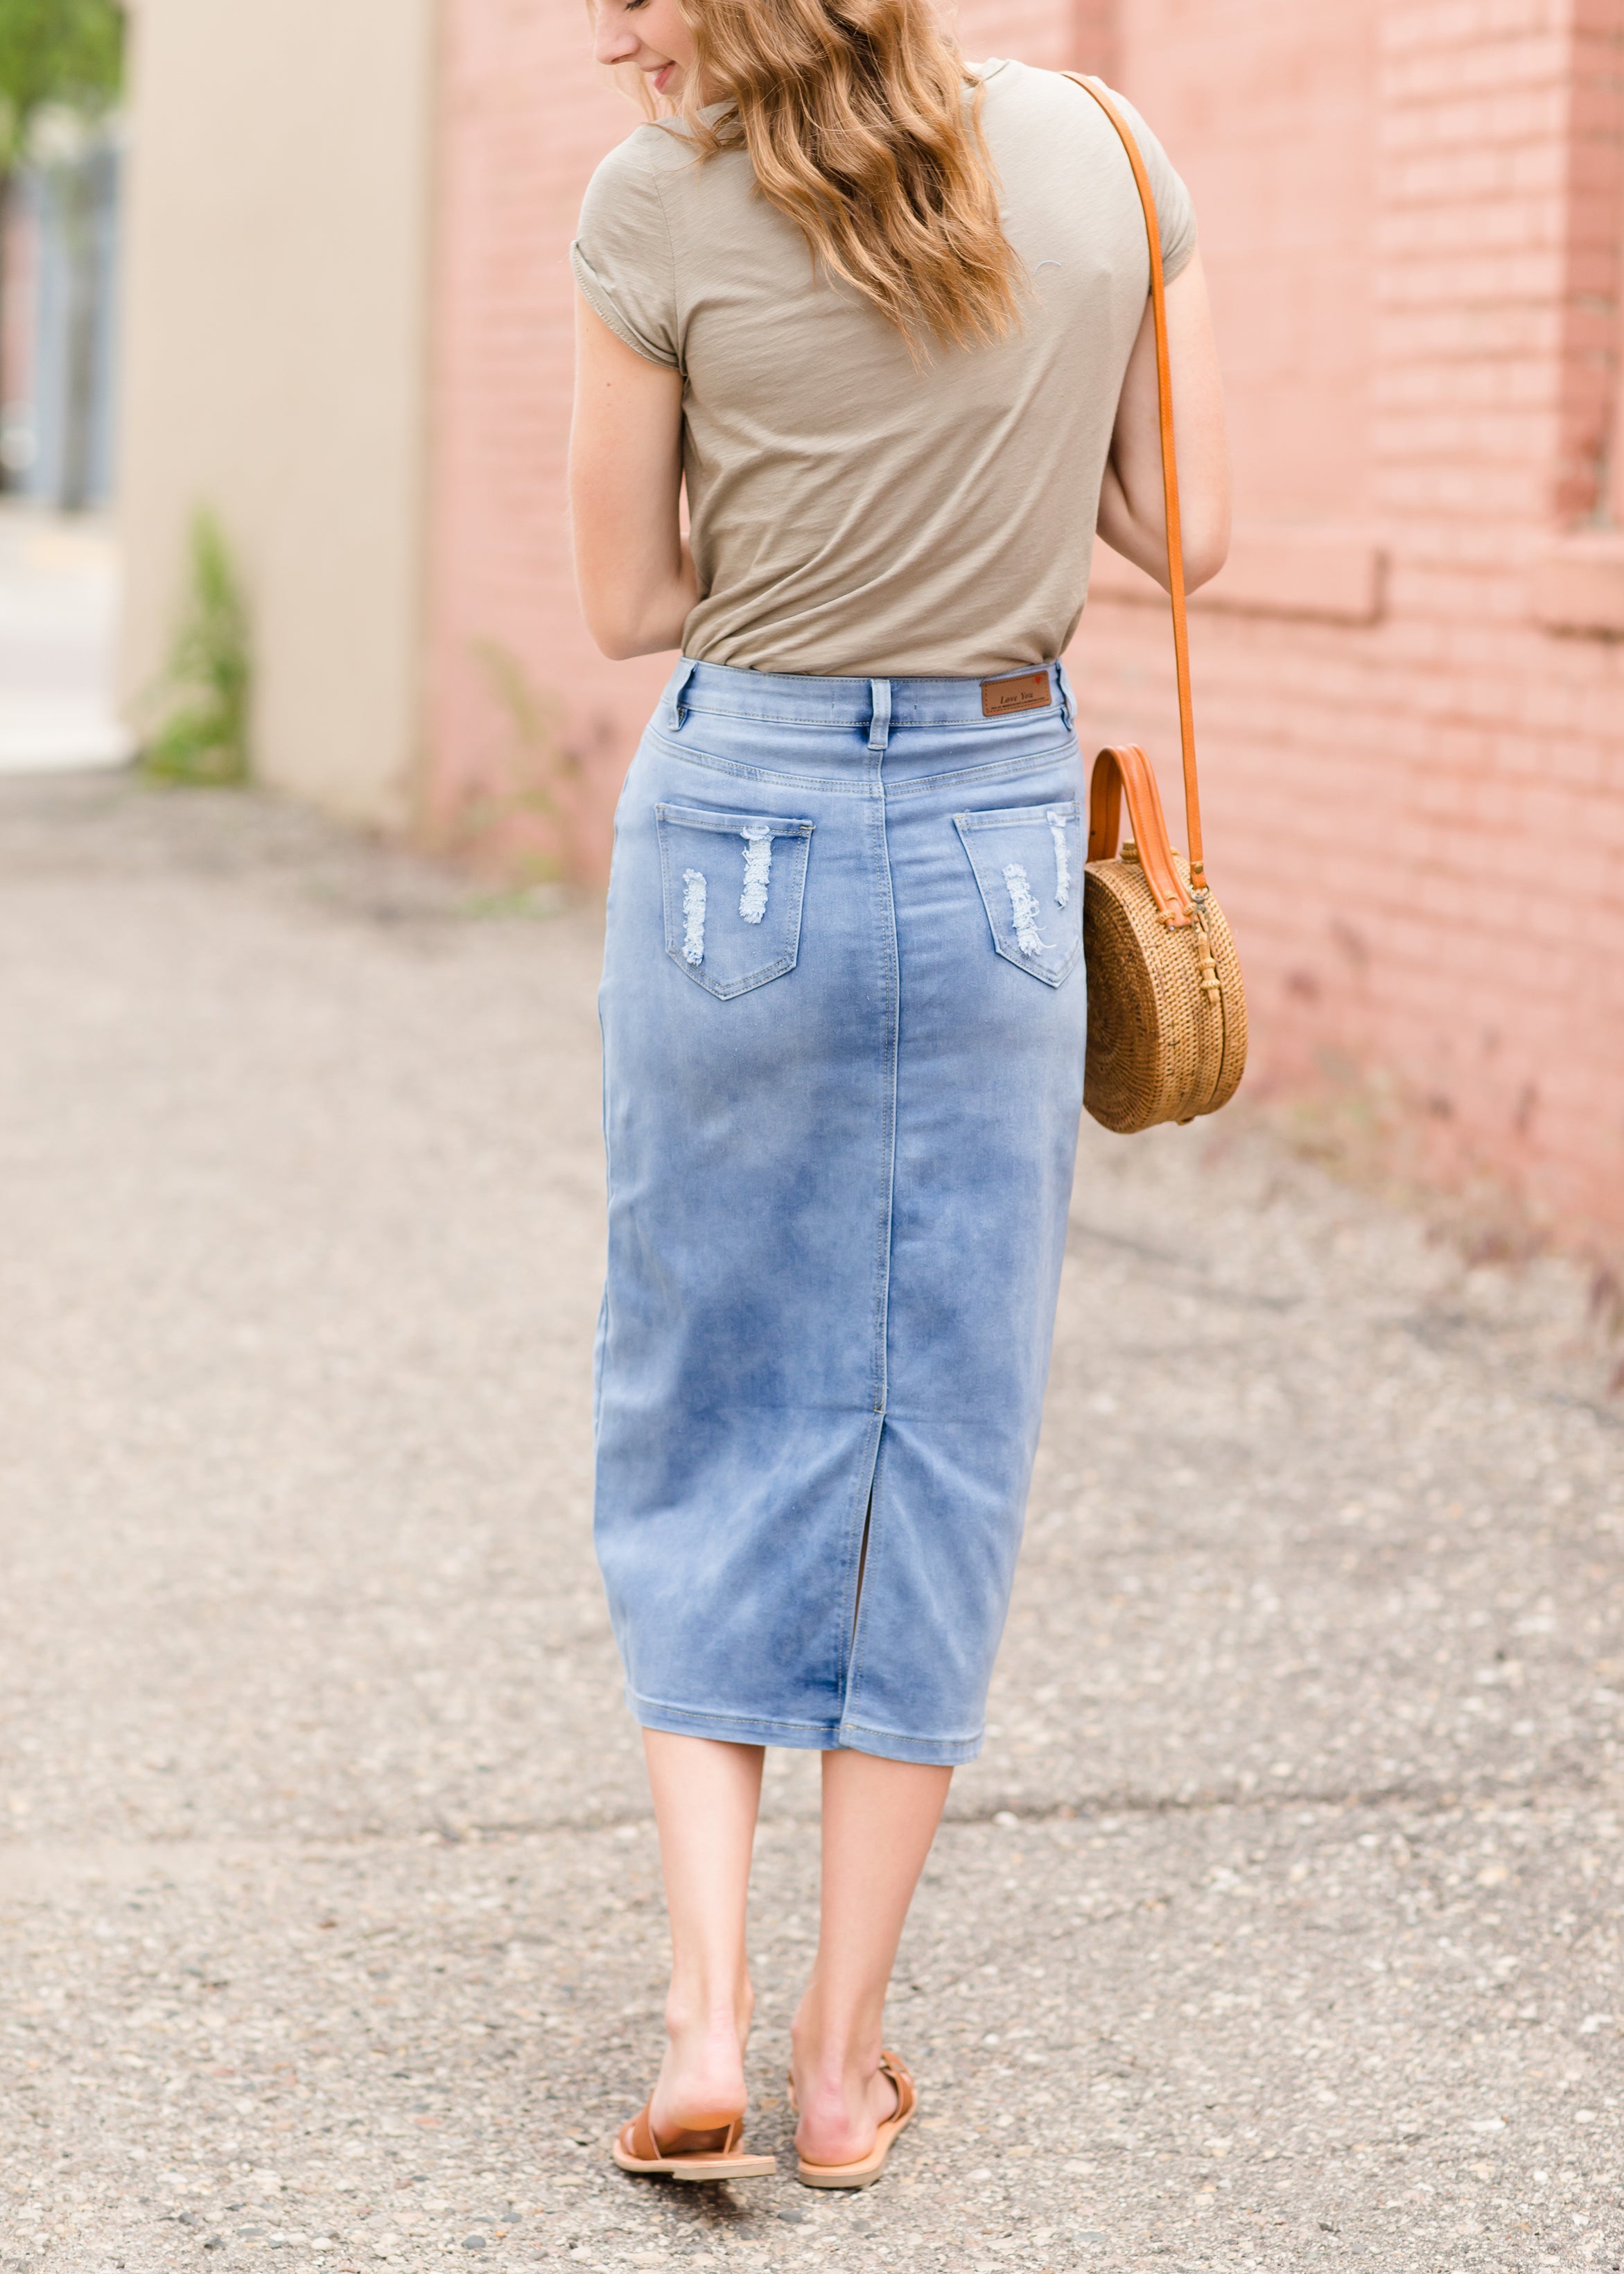 Denim Skirt Sexy Royalty-Free Images, Stock Photos & Pictures | Shutterstock